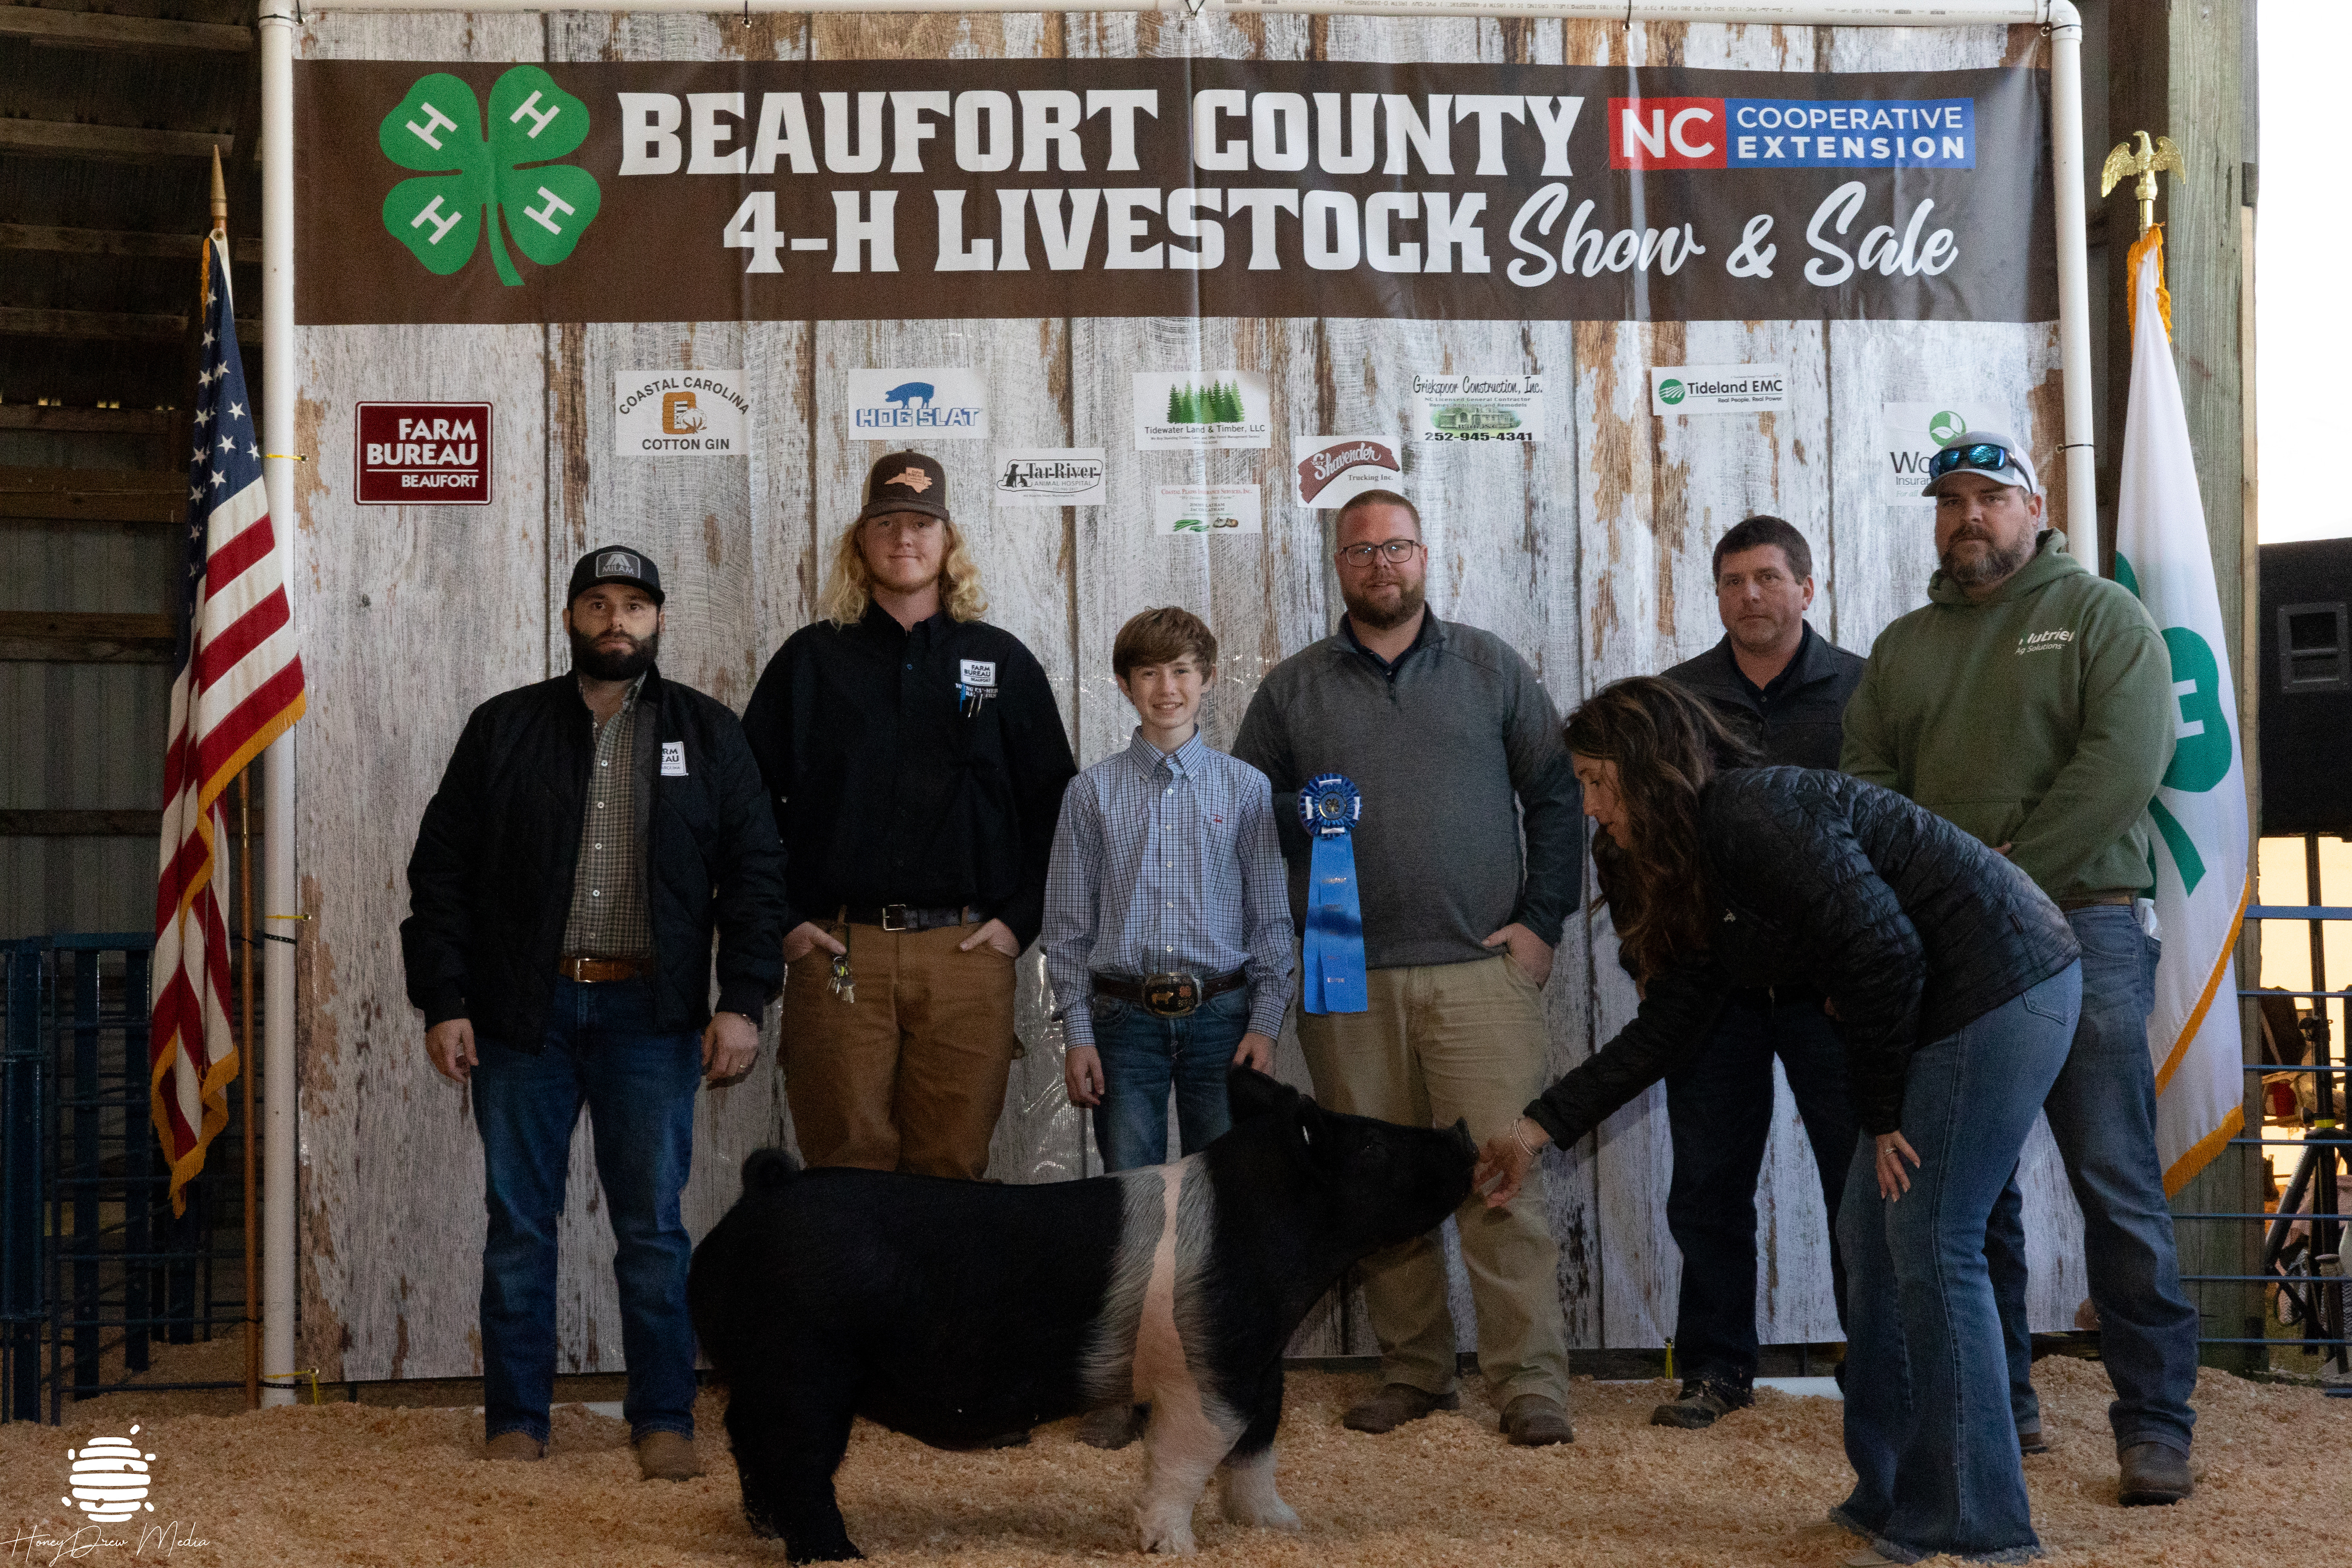 Picture of Dylan Briley with his hog and the buyers of his animal in front of the 4-H Livestock Show banner.